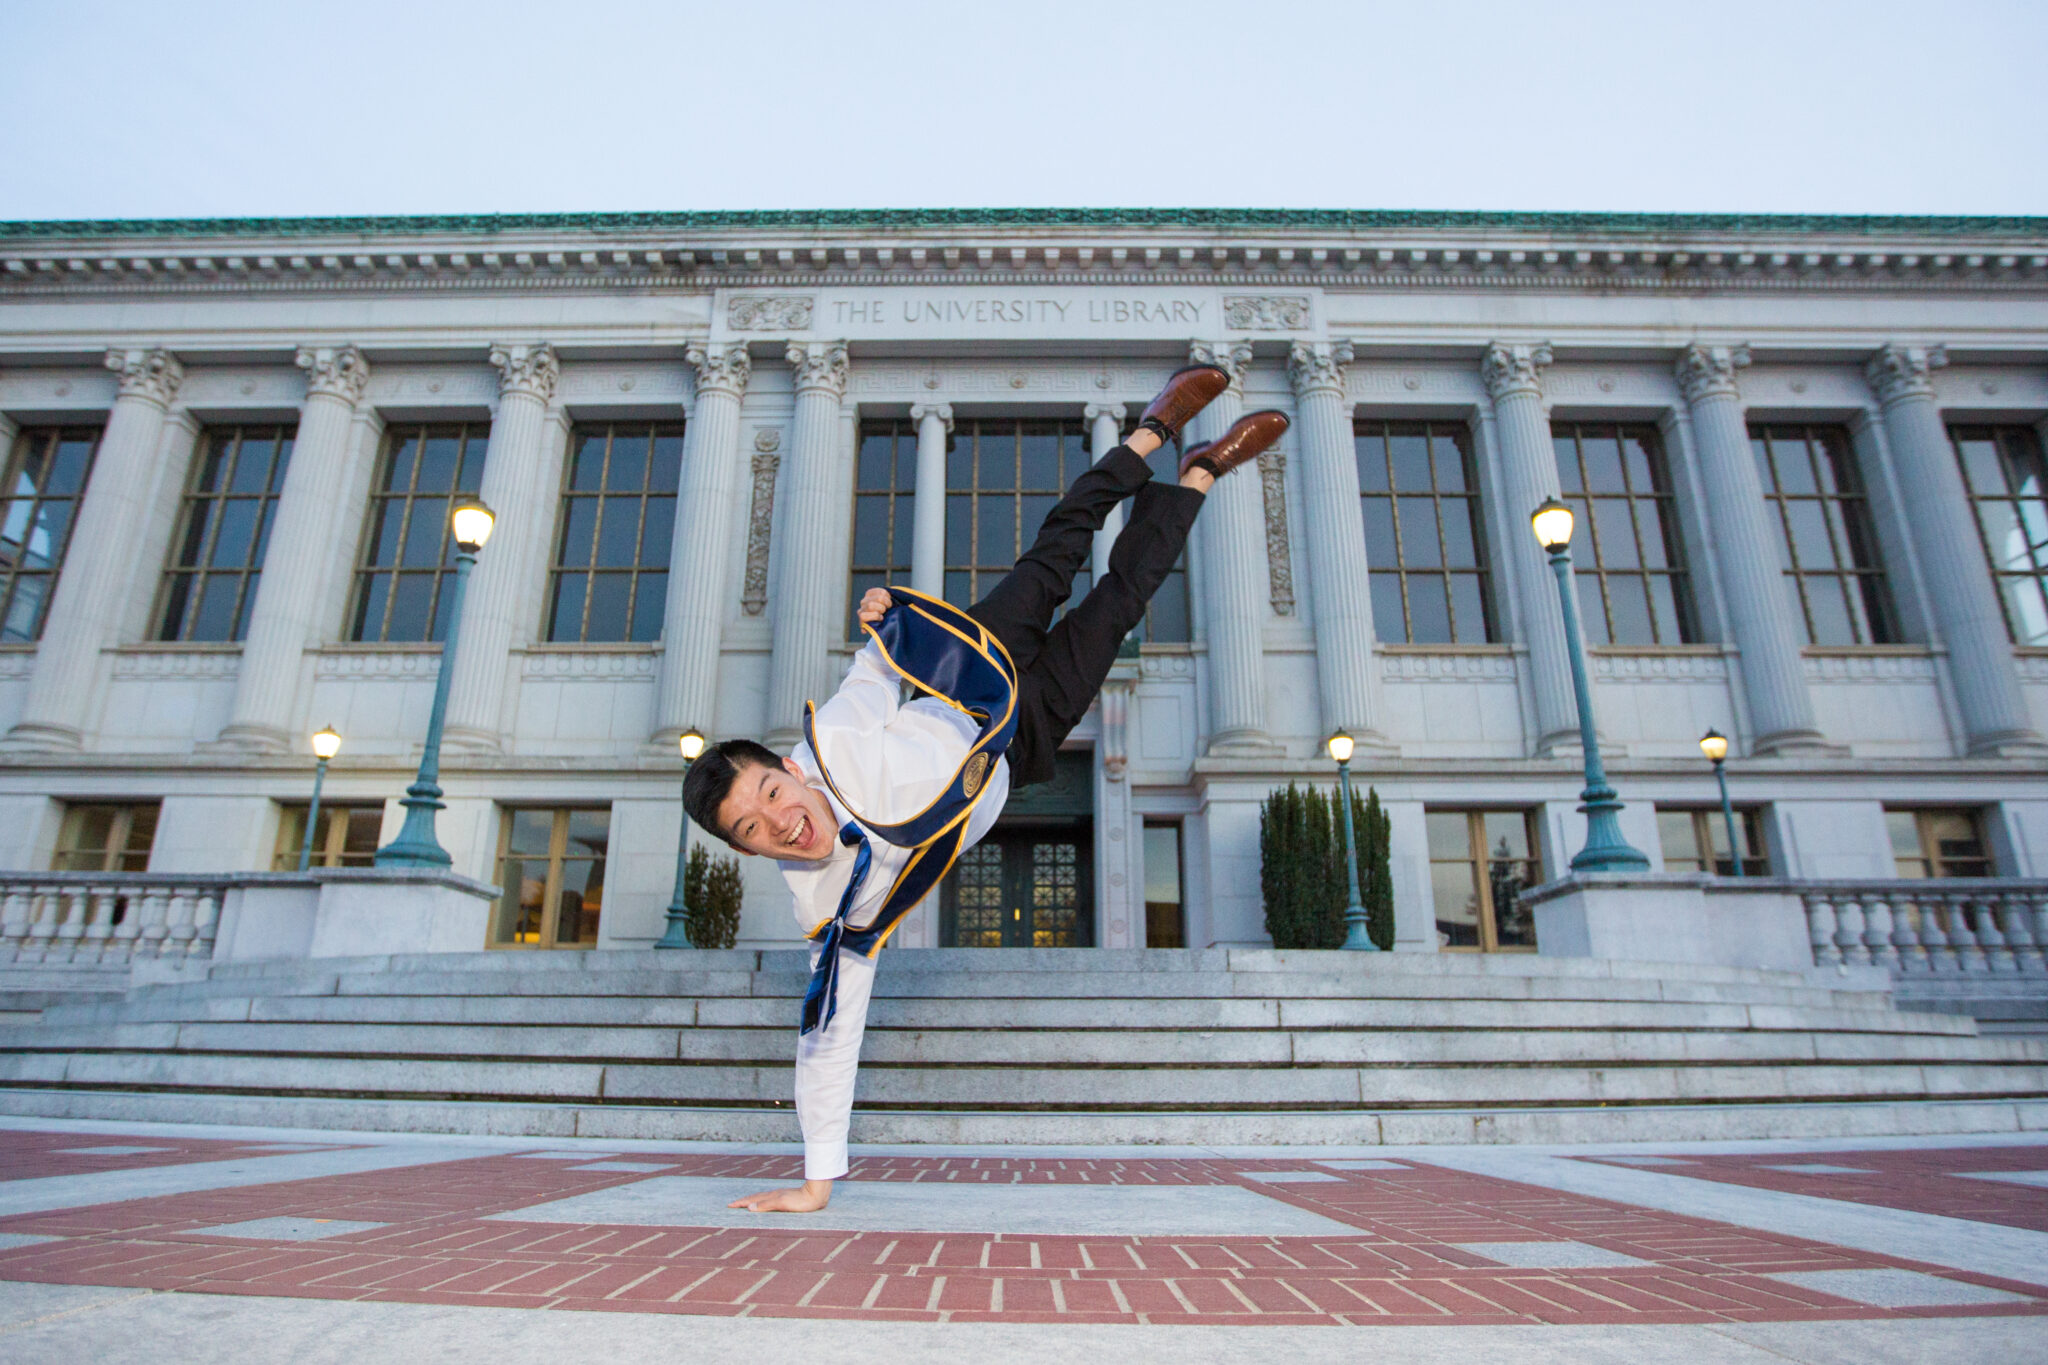 Robert Yu performs a dance move in front of the Bancroft Library wearing his graduation stole.